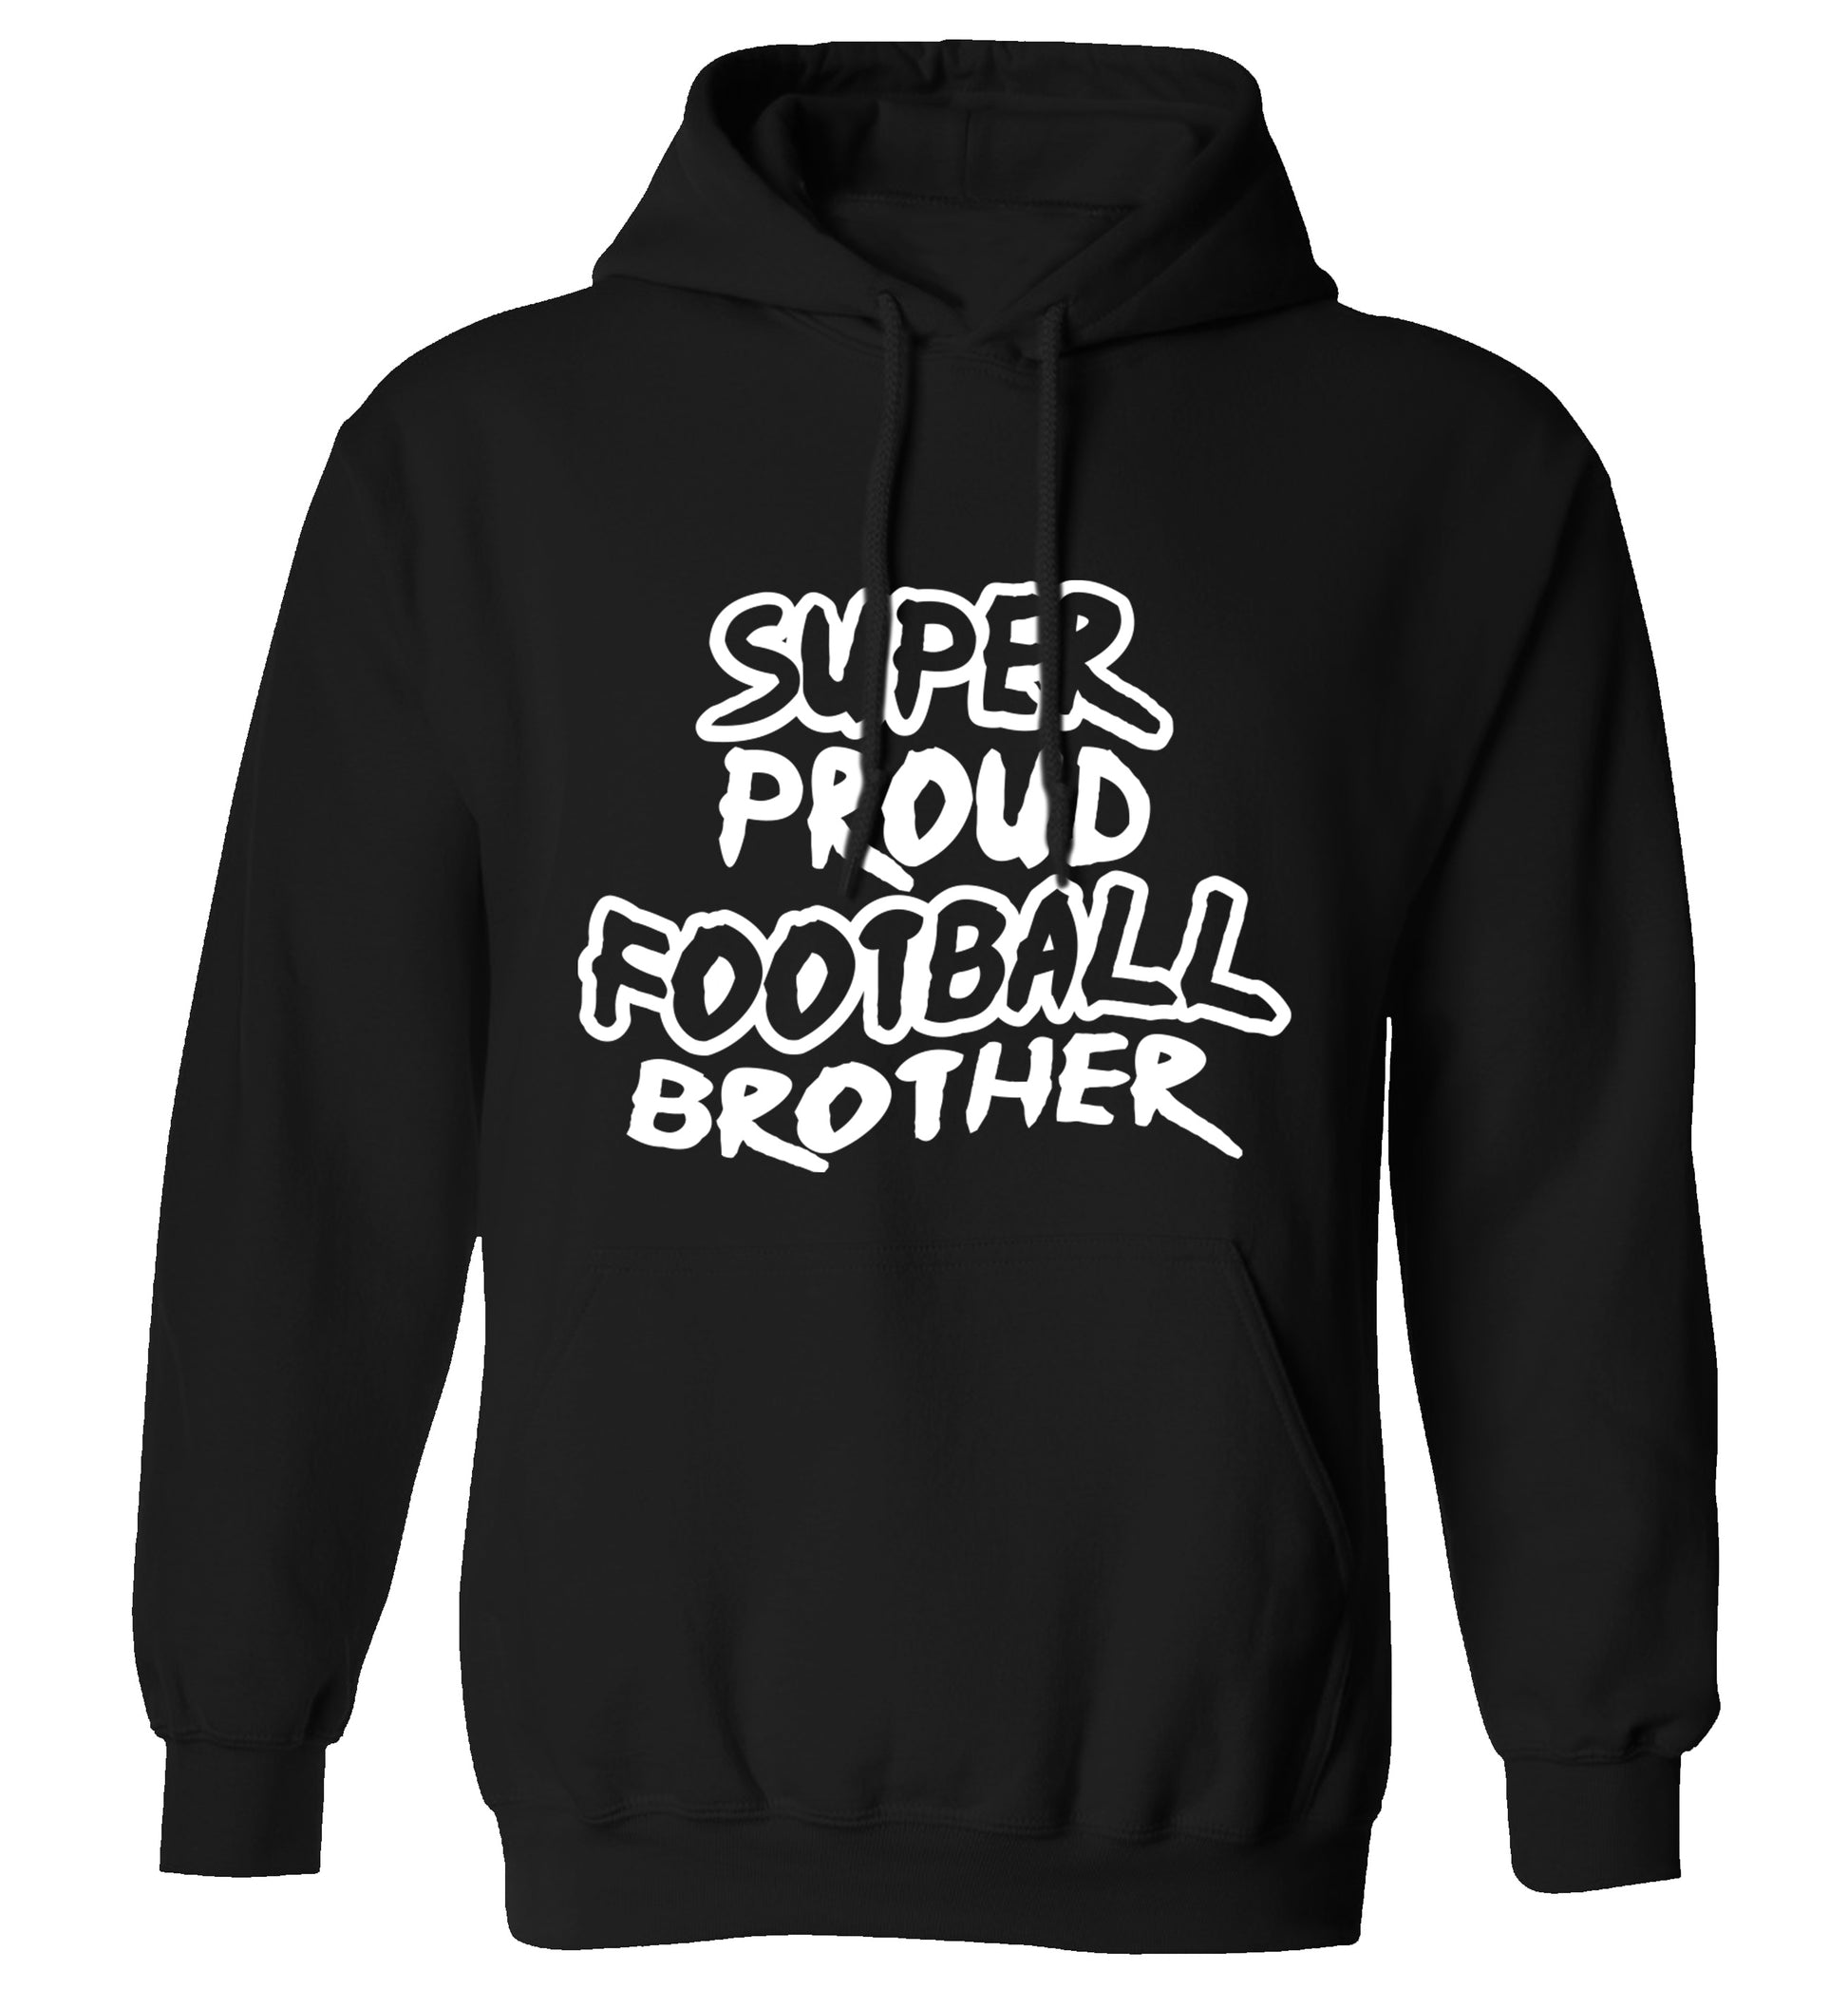 Super proud football brother adults unisexblack hoodie 2XL